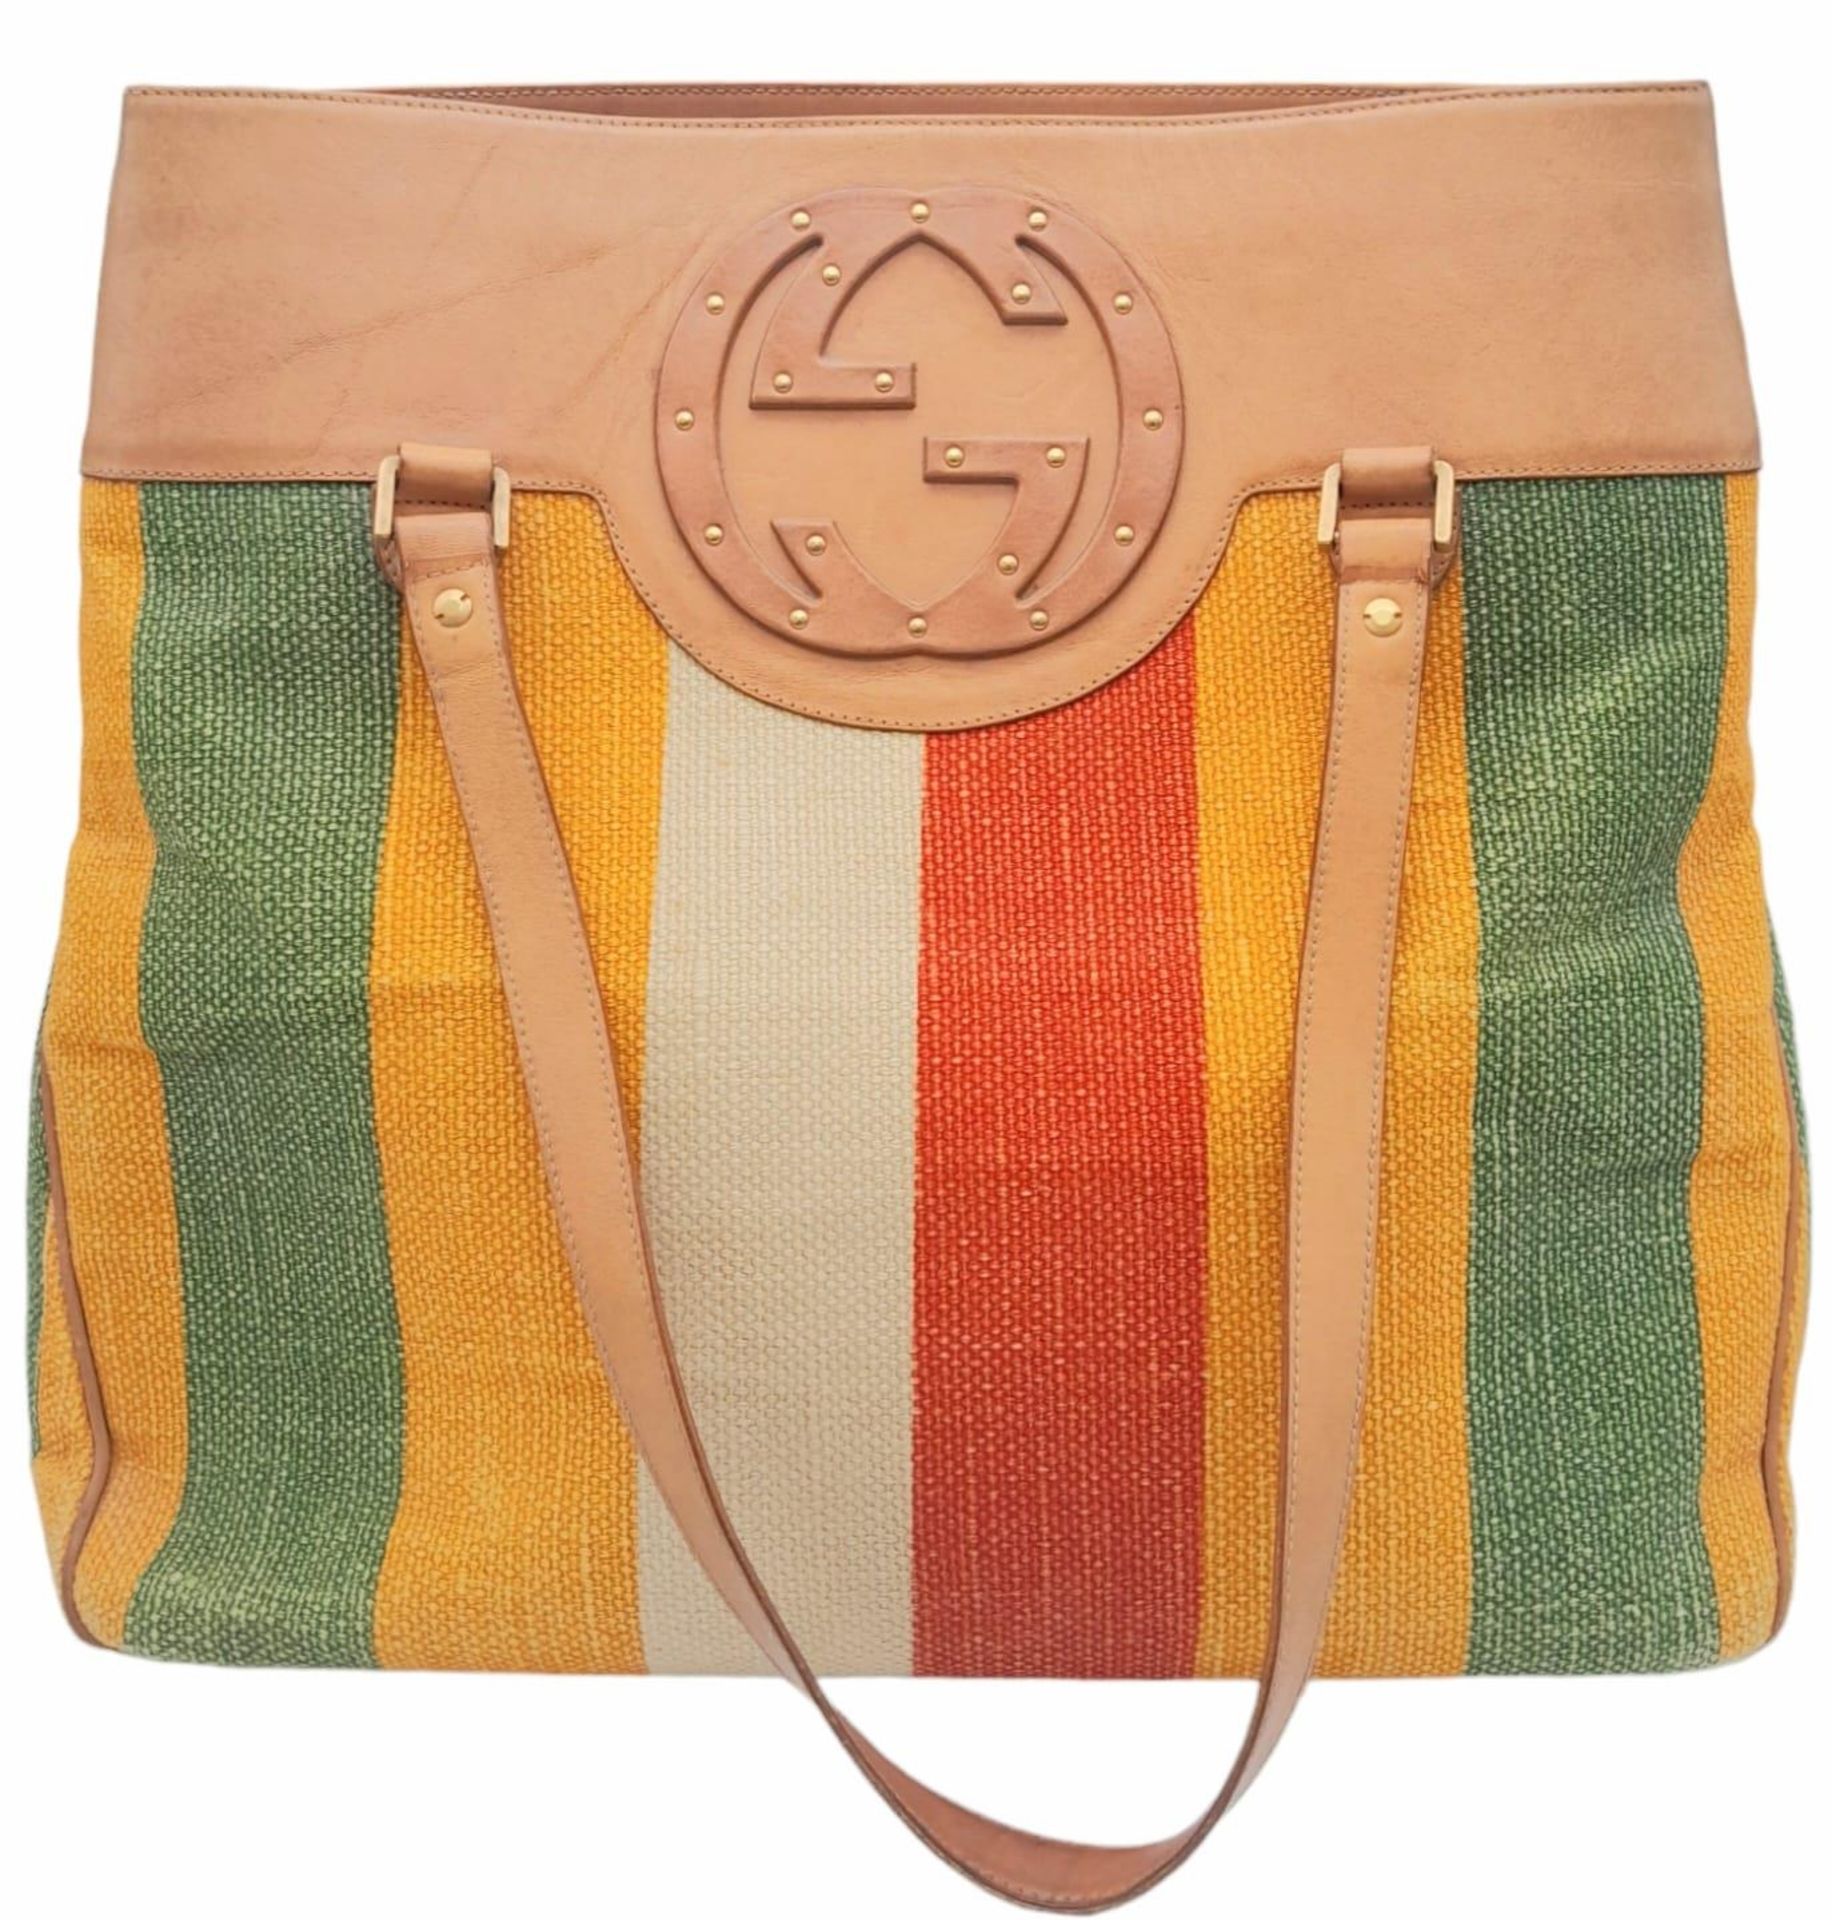 A Gucci Baiadera Canvas and Leather Tote Bag. Multi coloured canvas exterior with a large Gucci